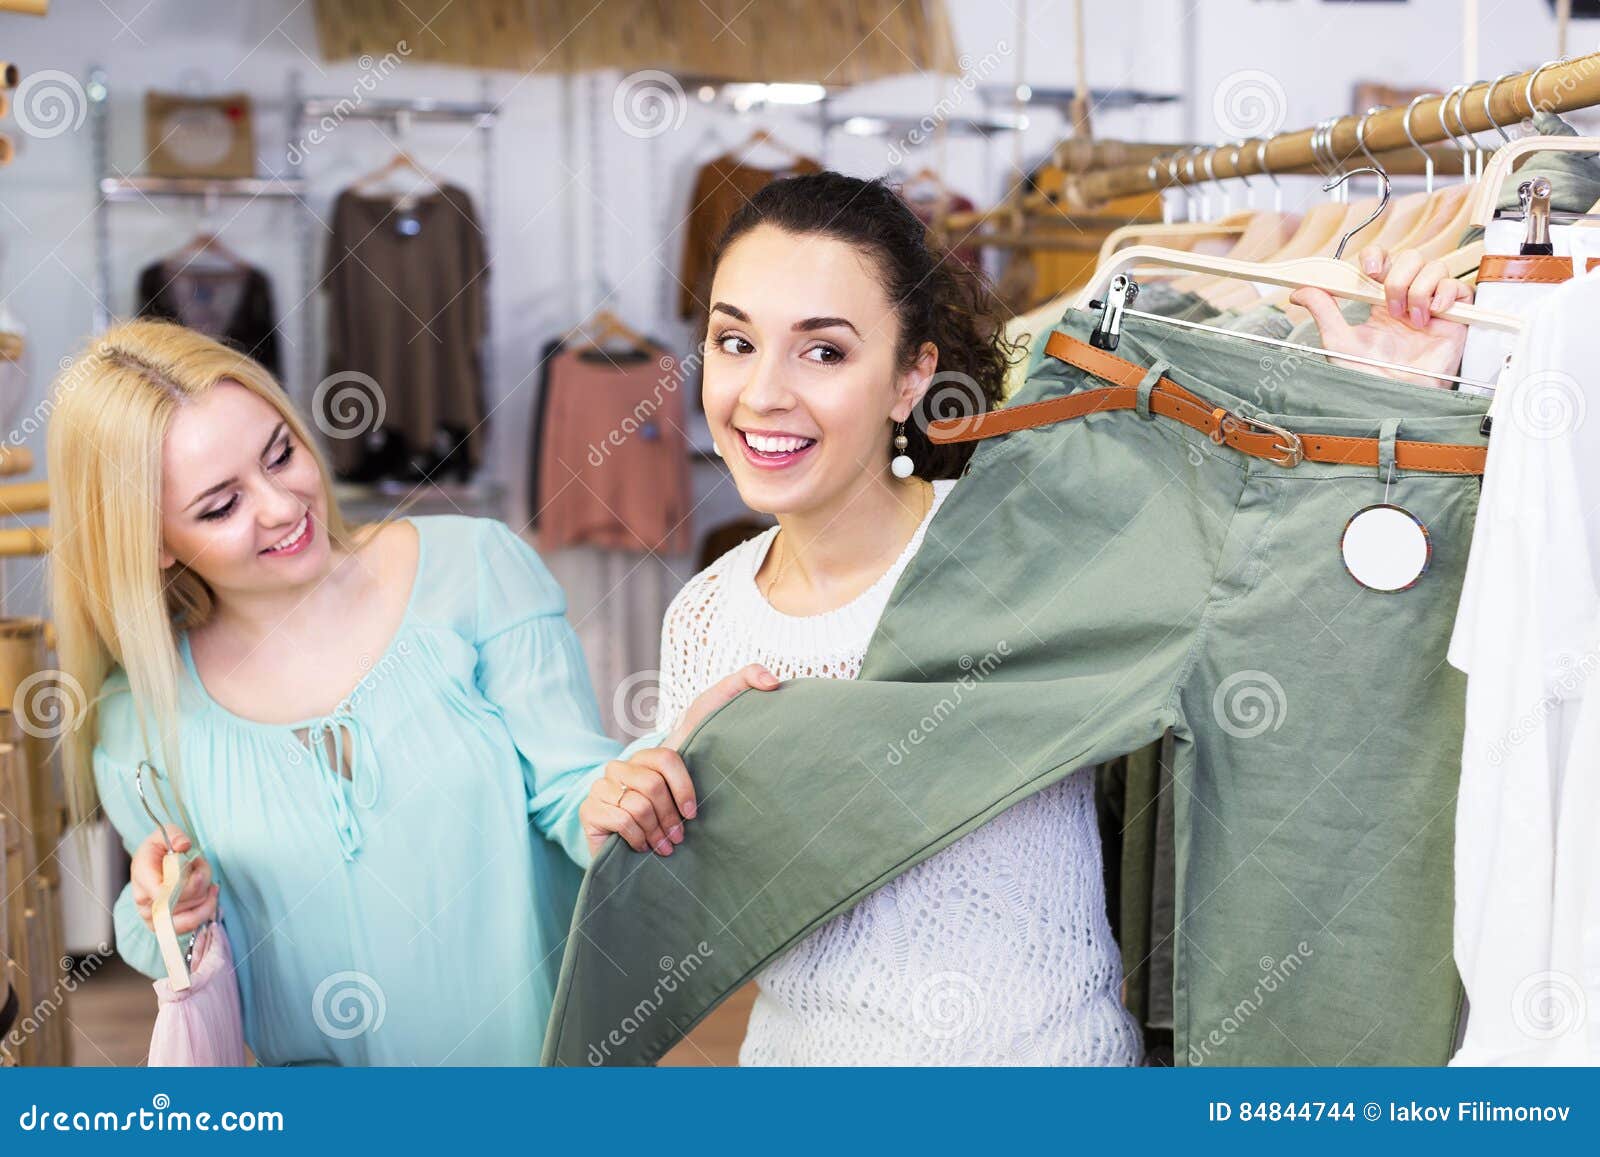 Two girls choosing clothes stock photo. Image of people - 84844744